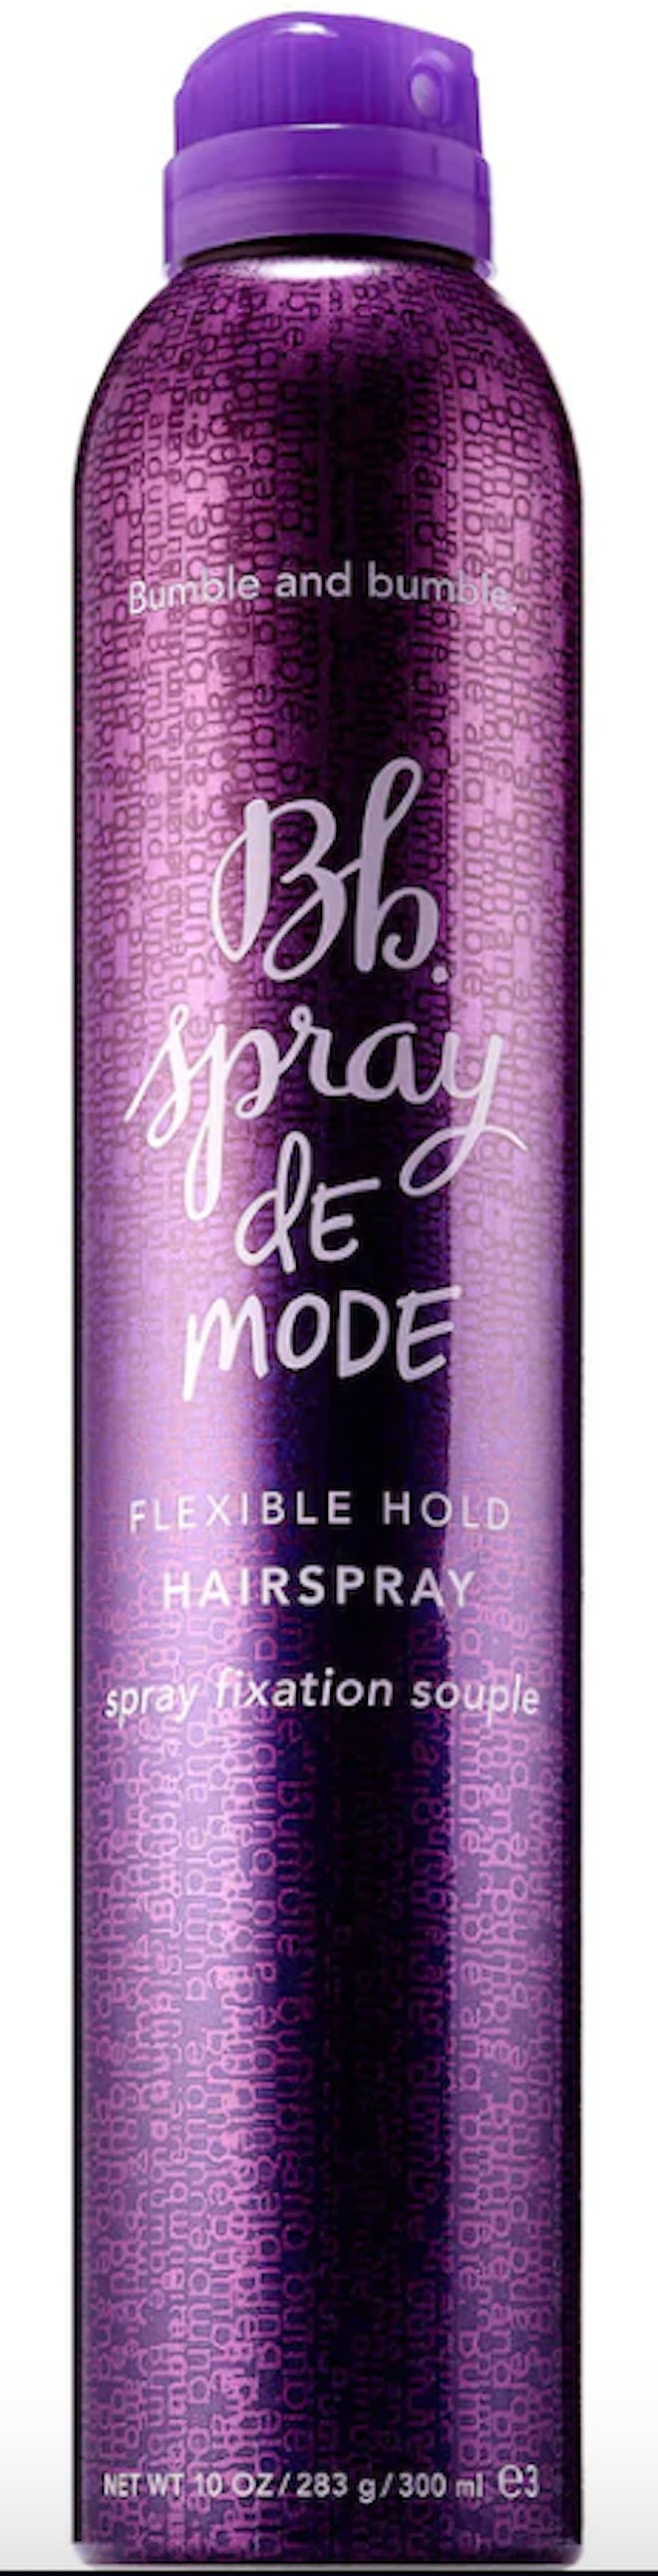 Bumble and bumble Spray de Mode Flexible Hold Hairspray for finger waves